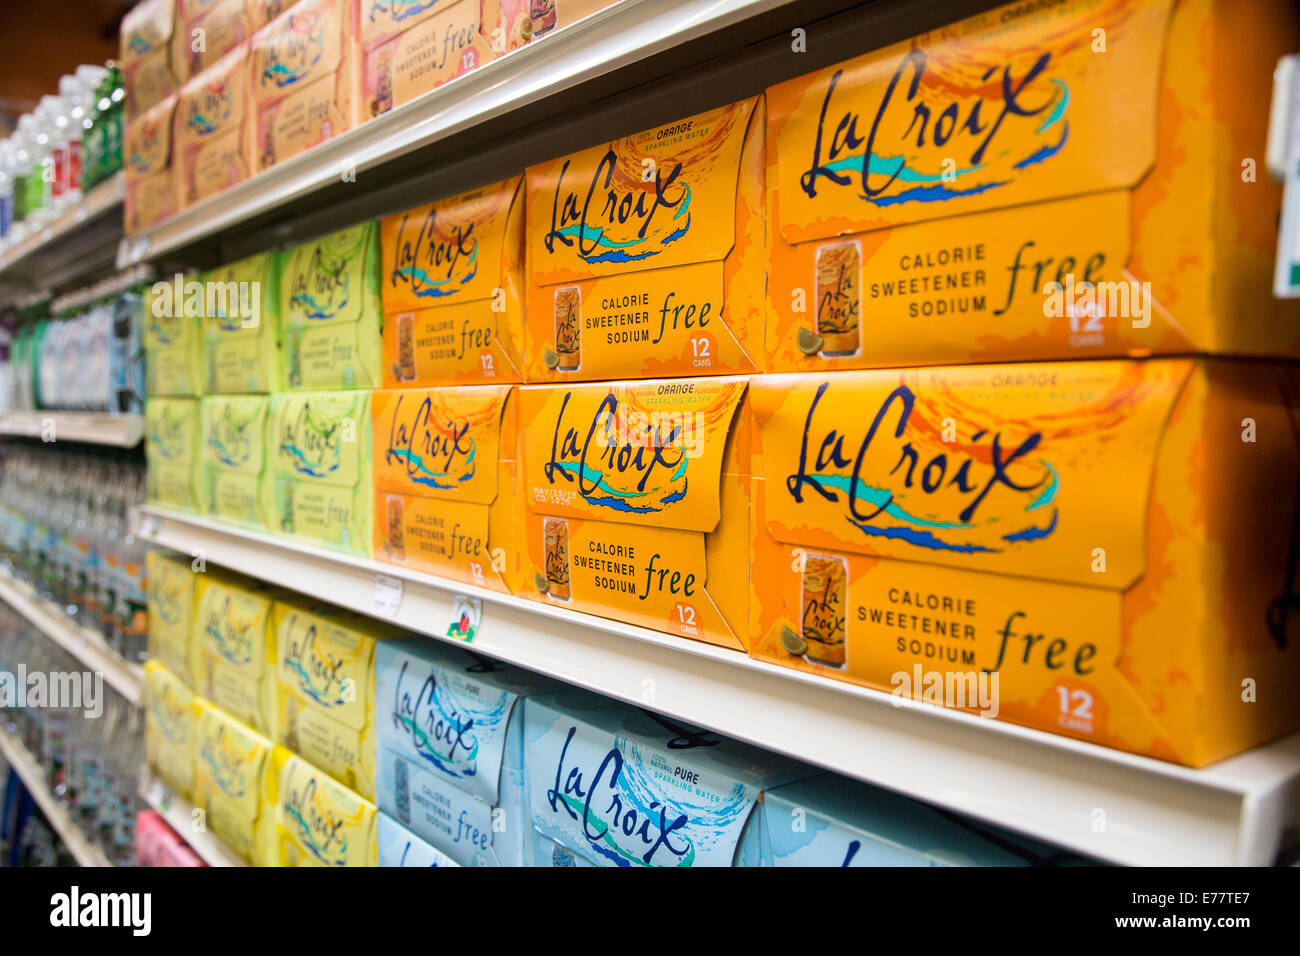 Grocery store with shelves socked with La Croix sparking water. Stock Photo